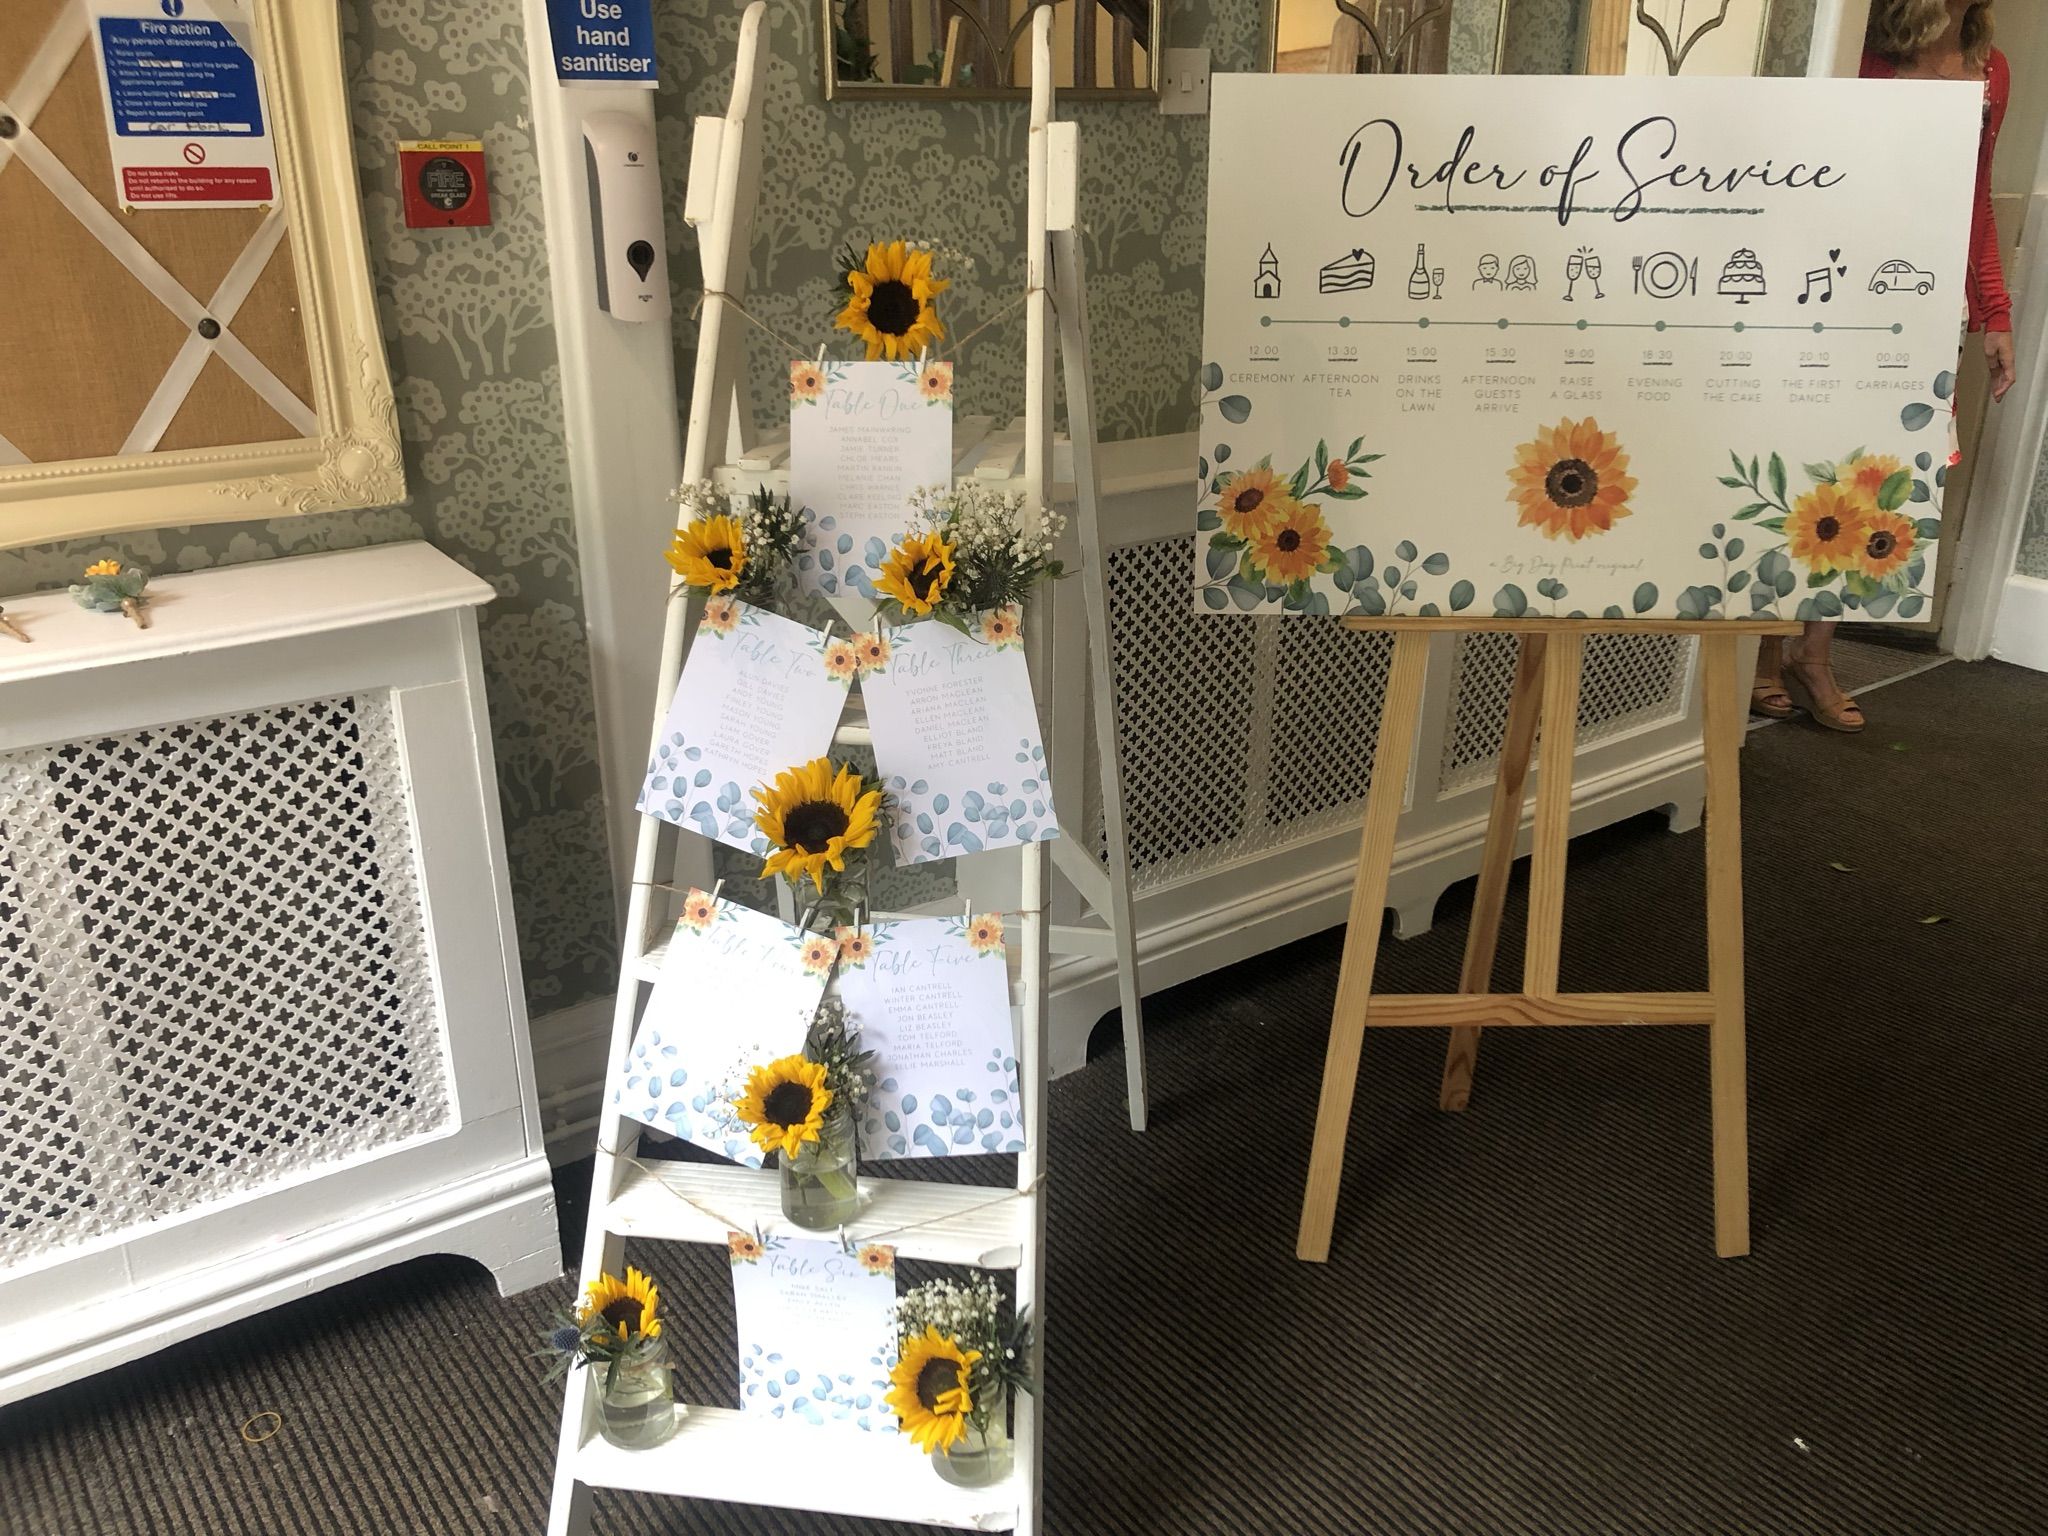 a display of cards and sunflowers in a room.